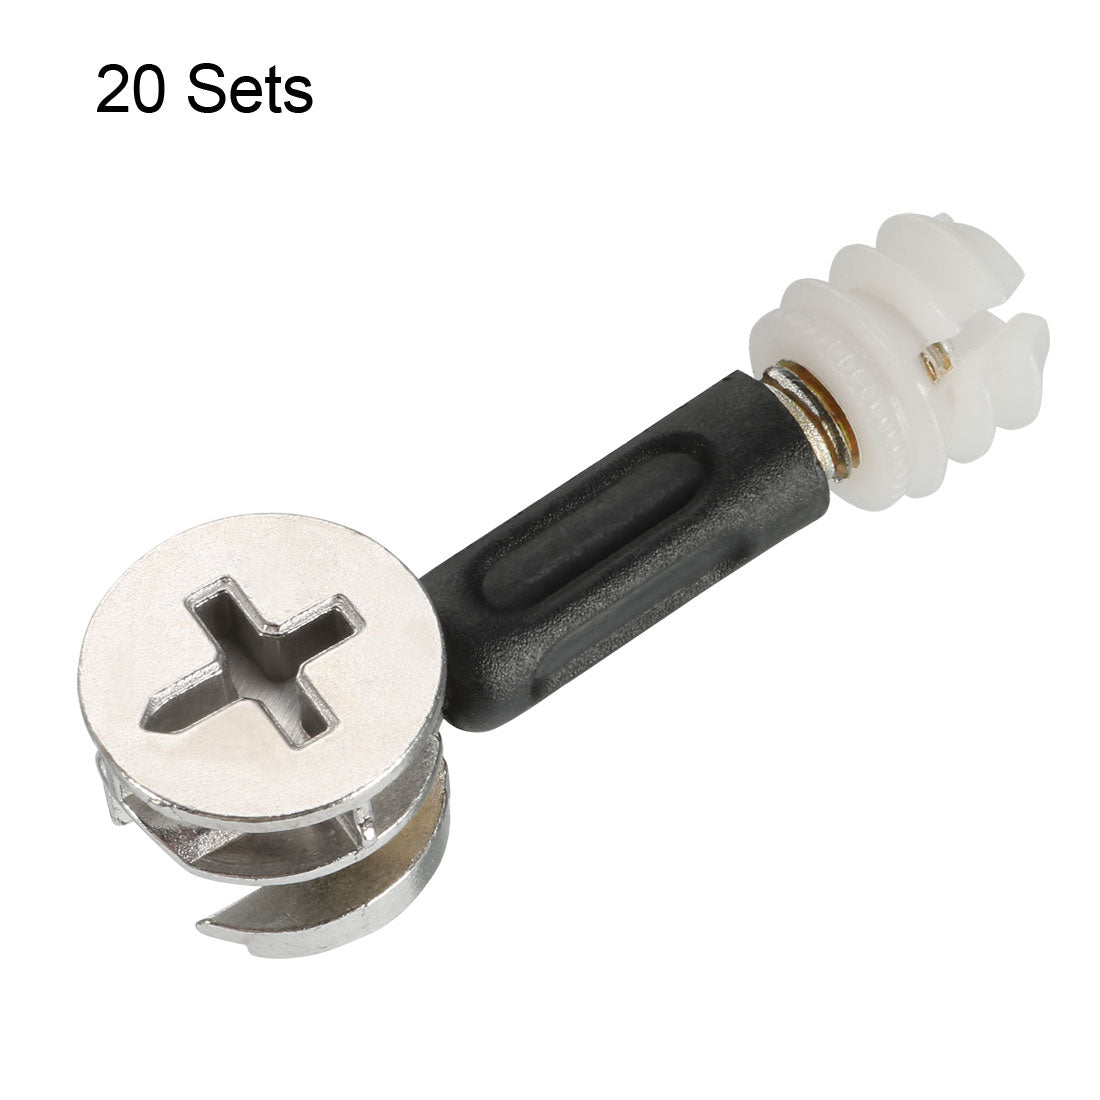 uxcell Uxcell 20 Sets Furniture Connecting 15mm OD Cam Fitting w Dowel Screws Pre-inserted Nut